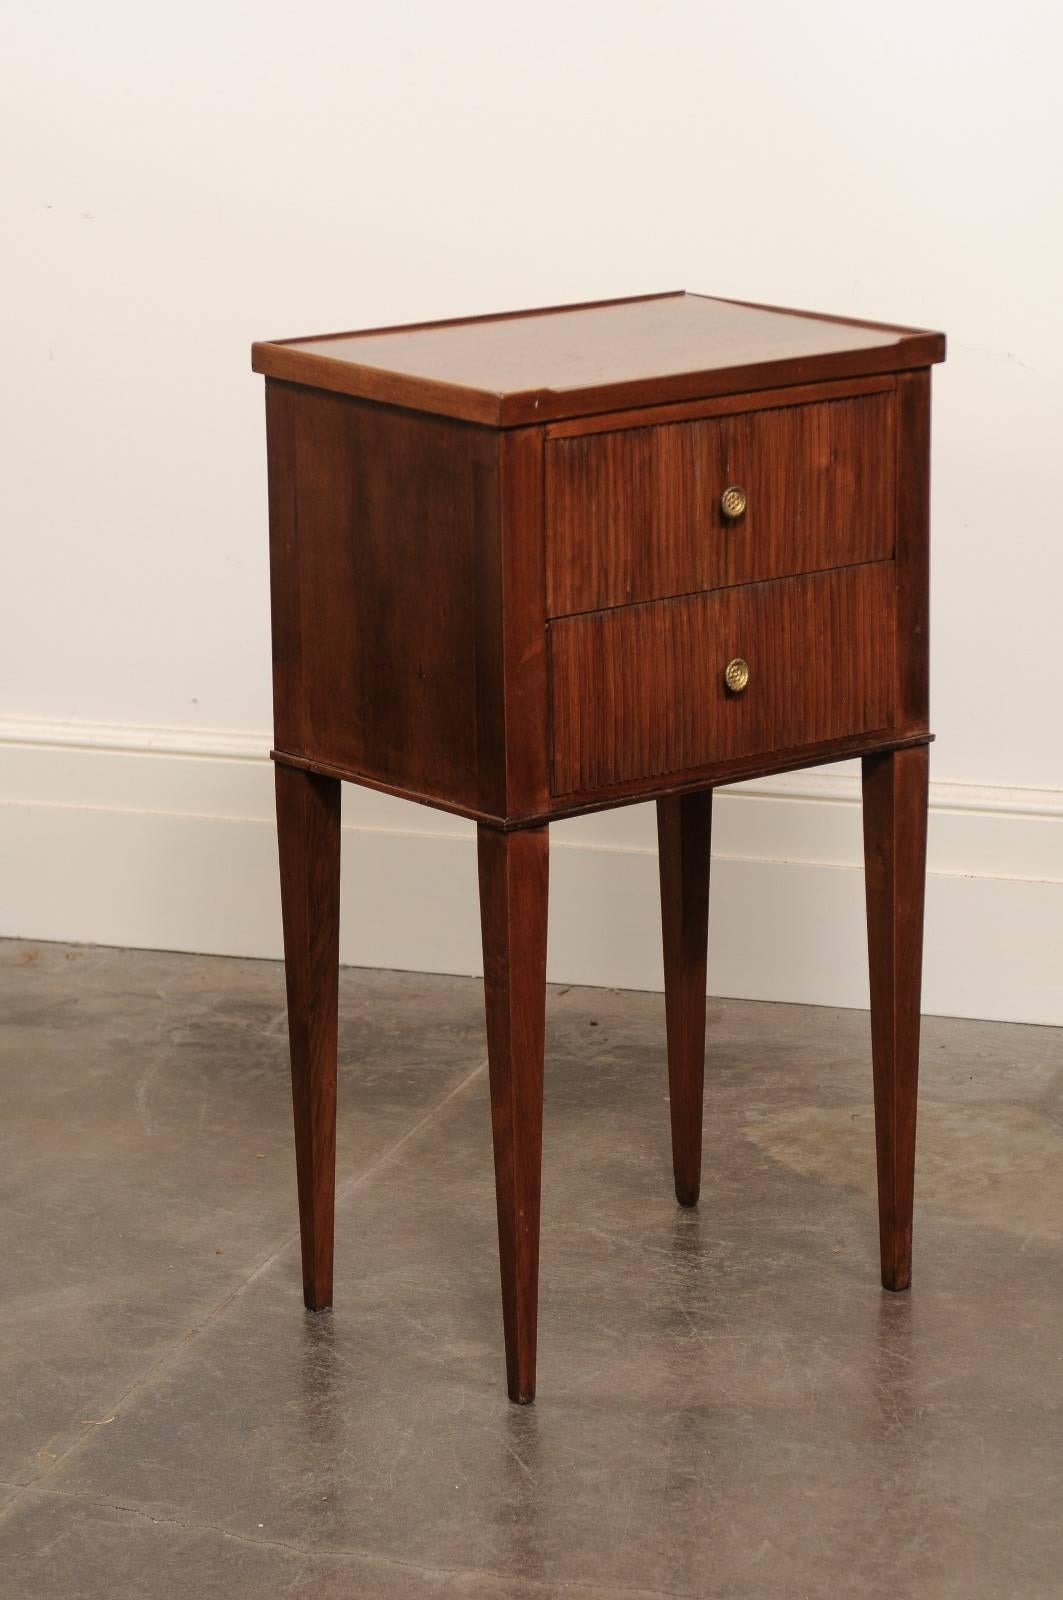 This French mahogany side table from the turn of the century features a rectangular three-quarter gallery tray top over two drawers with reeded décor and brass pulls. The piece is raised on four slender tapered legs. The simplicity of the clean